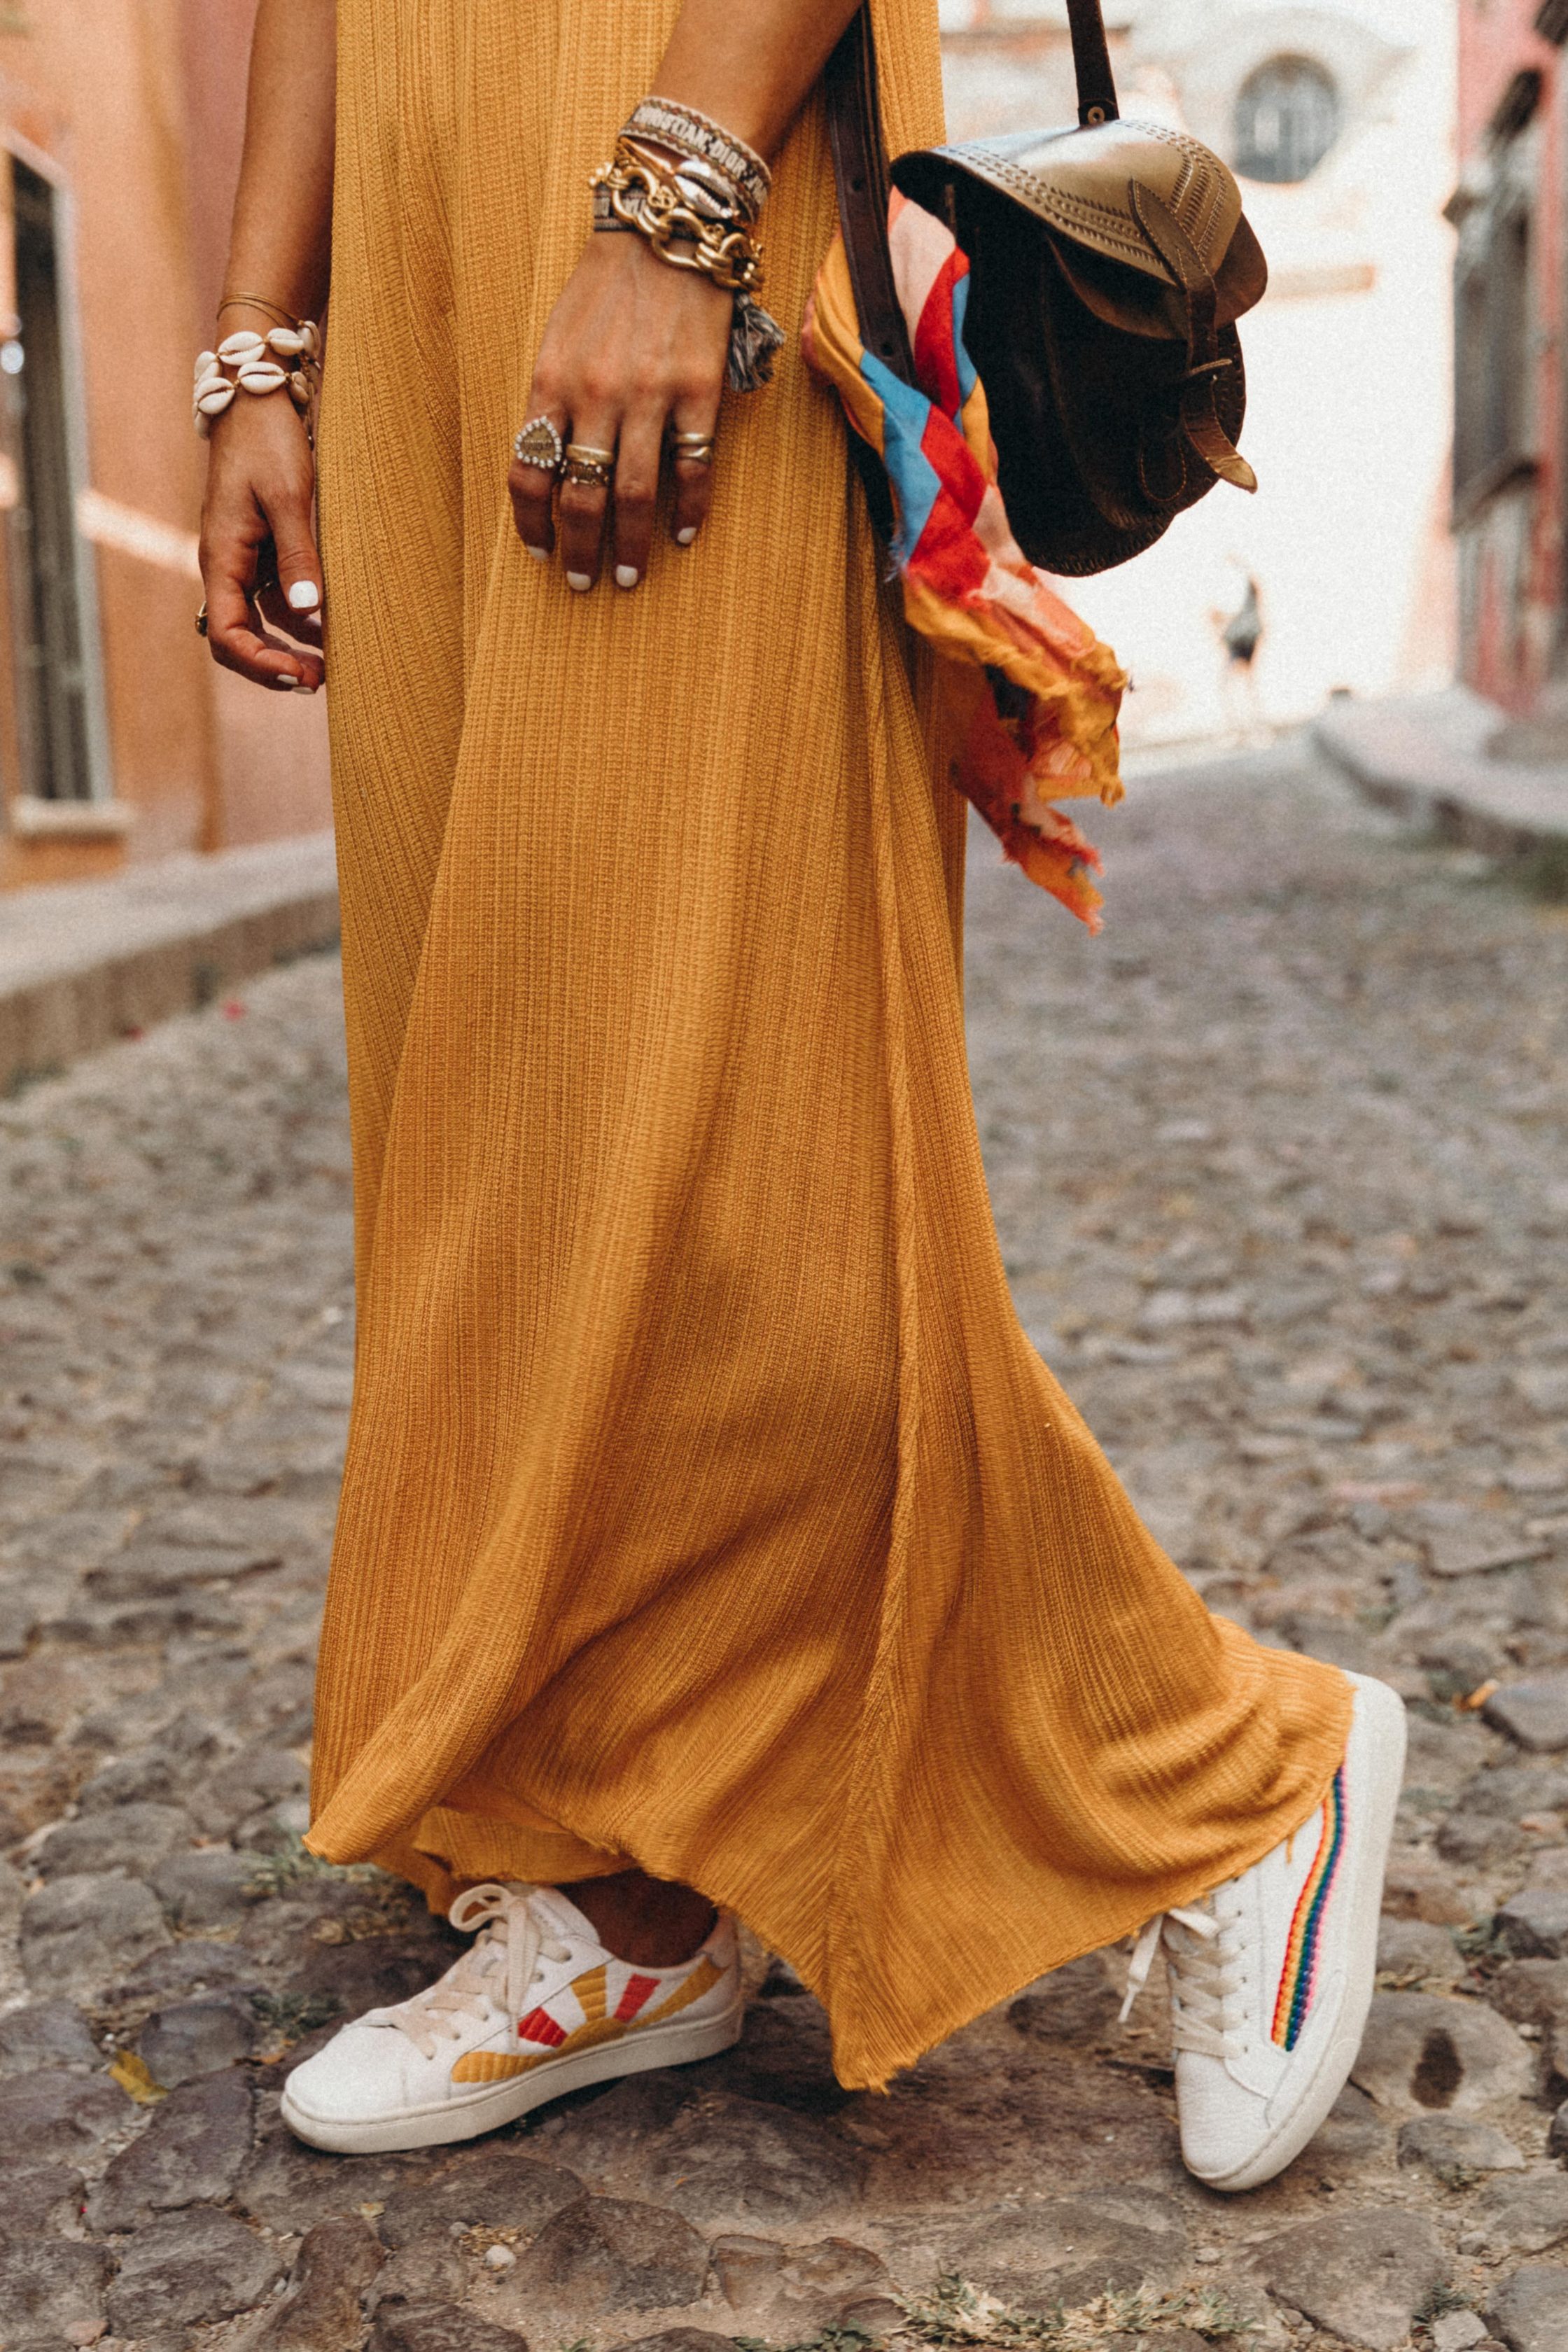 Sara of Collage Vintage wearing a long mustard dress and embroidered sneakers